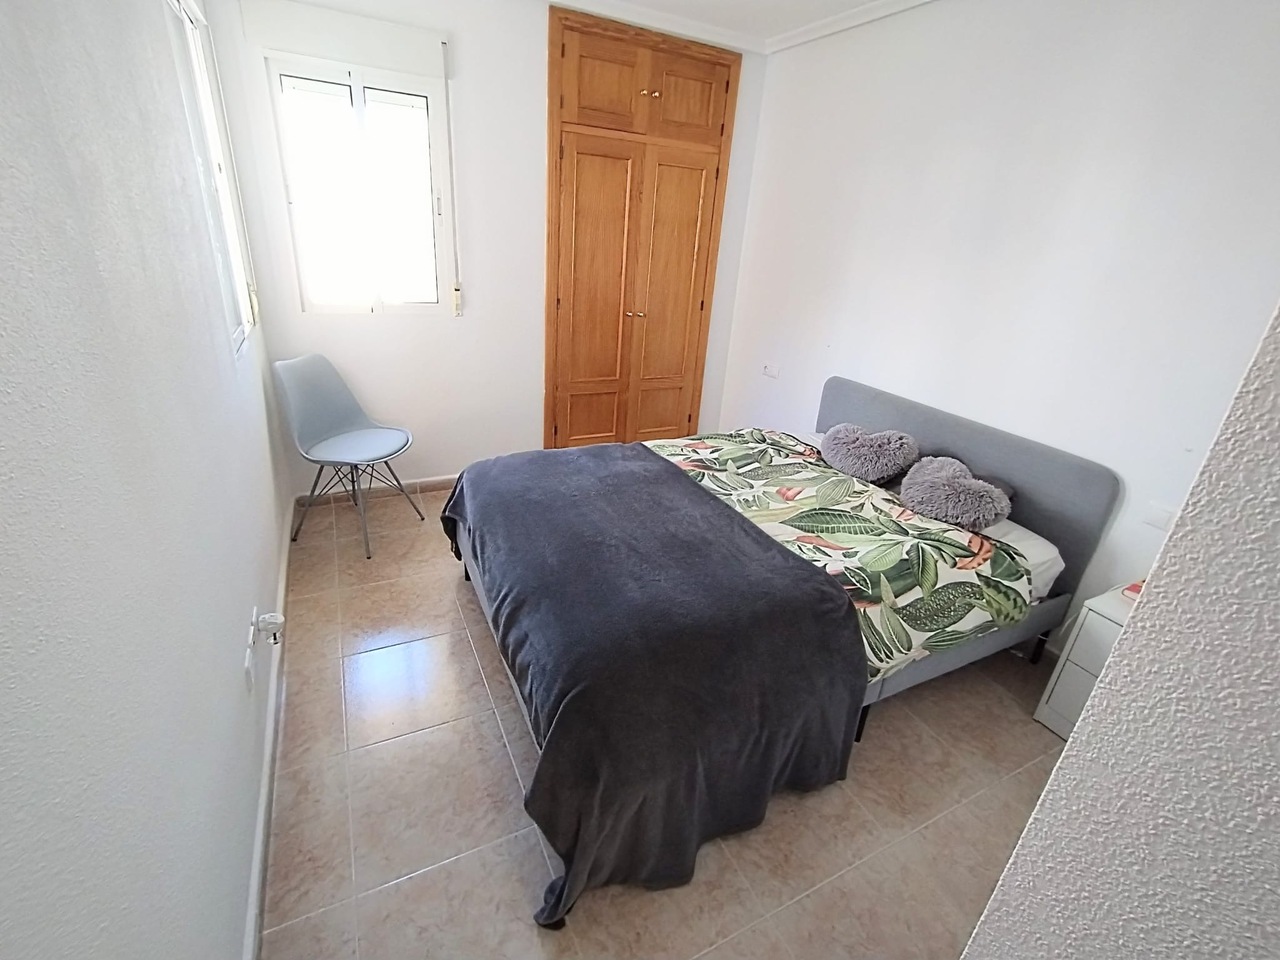 SWDF1921: Townhouse for sale in Playa Flamenca